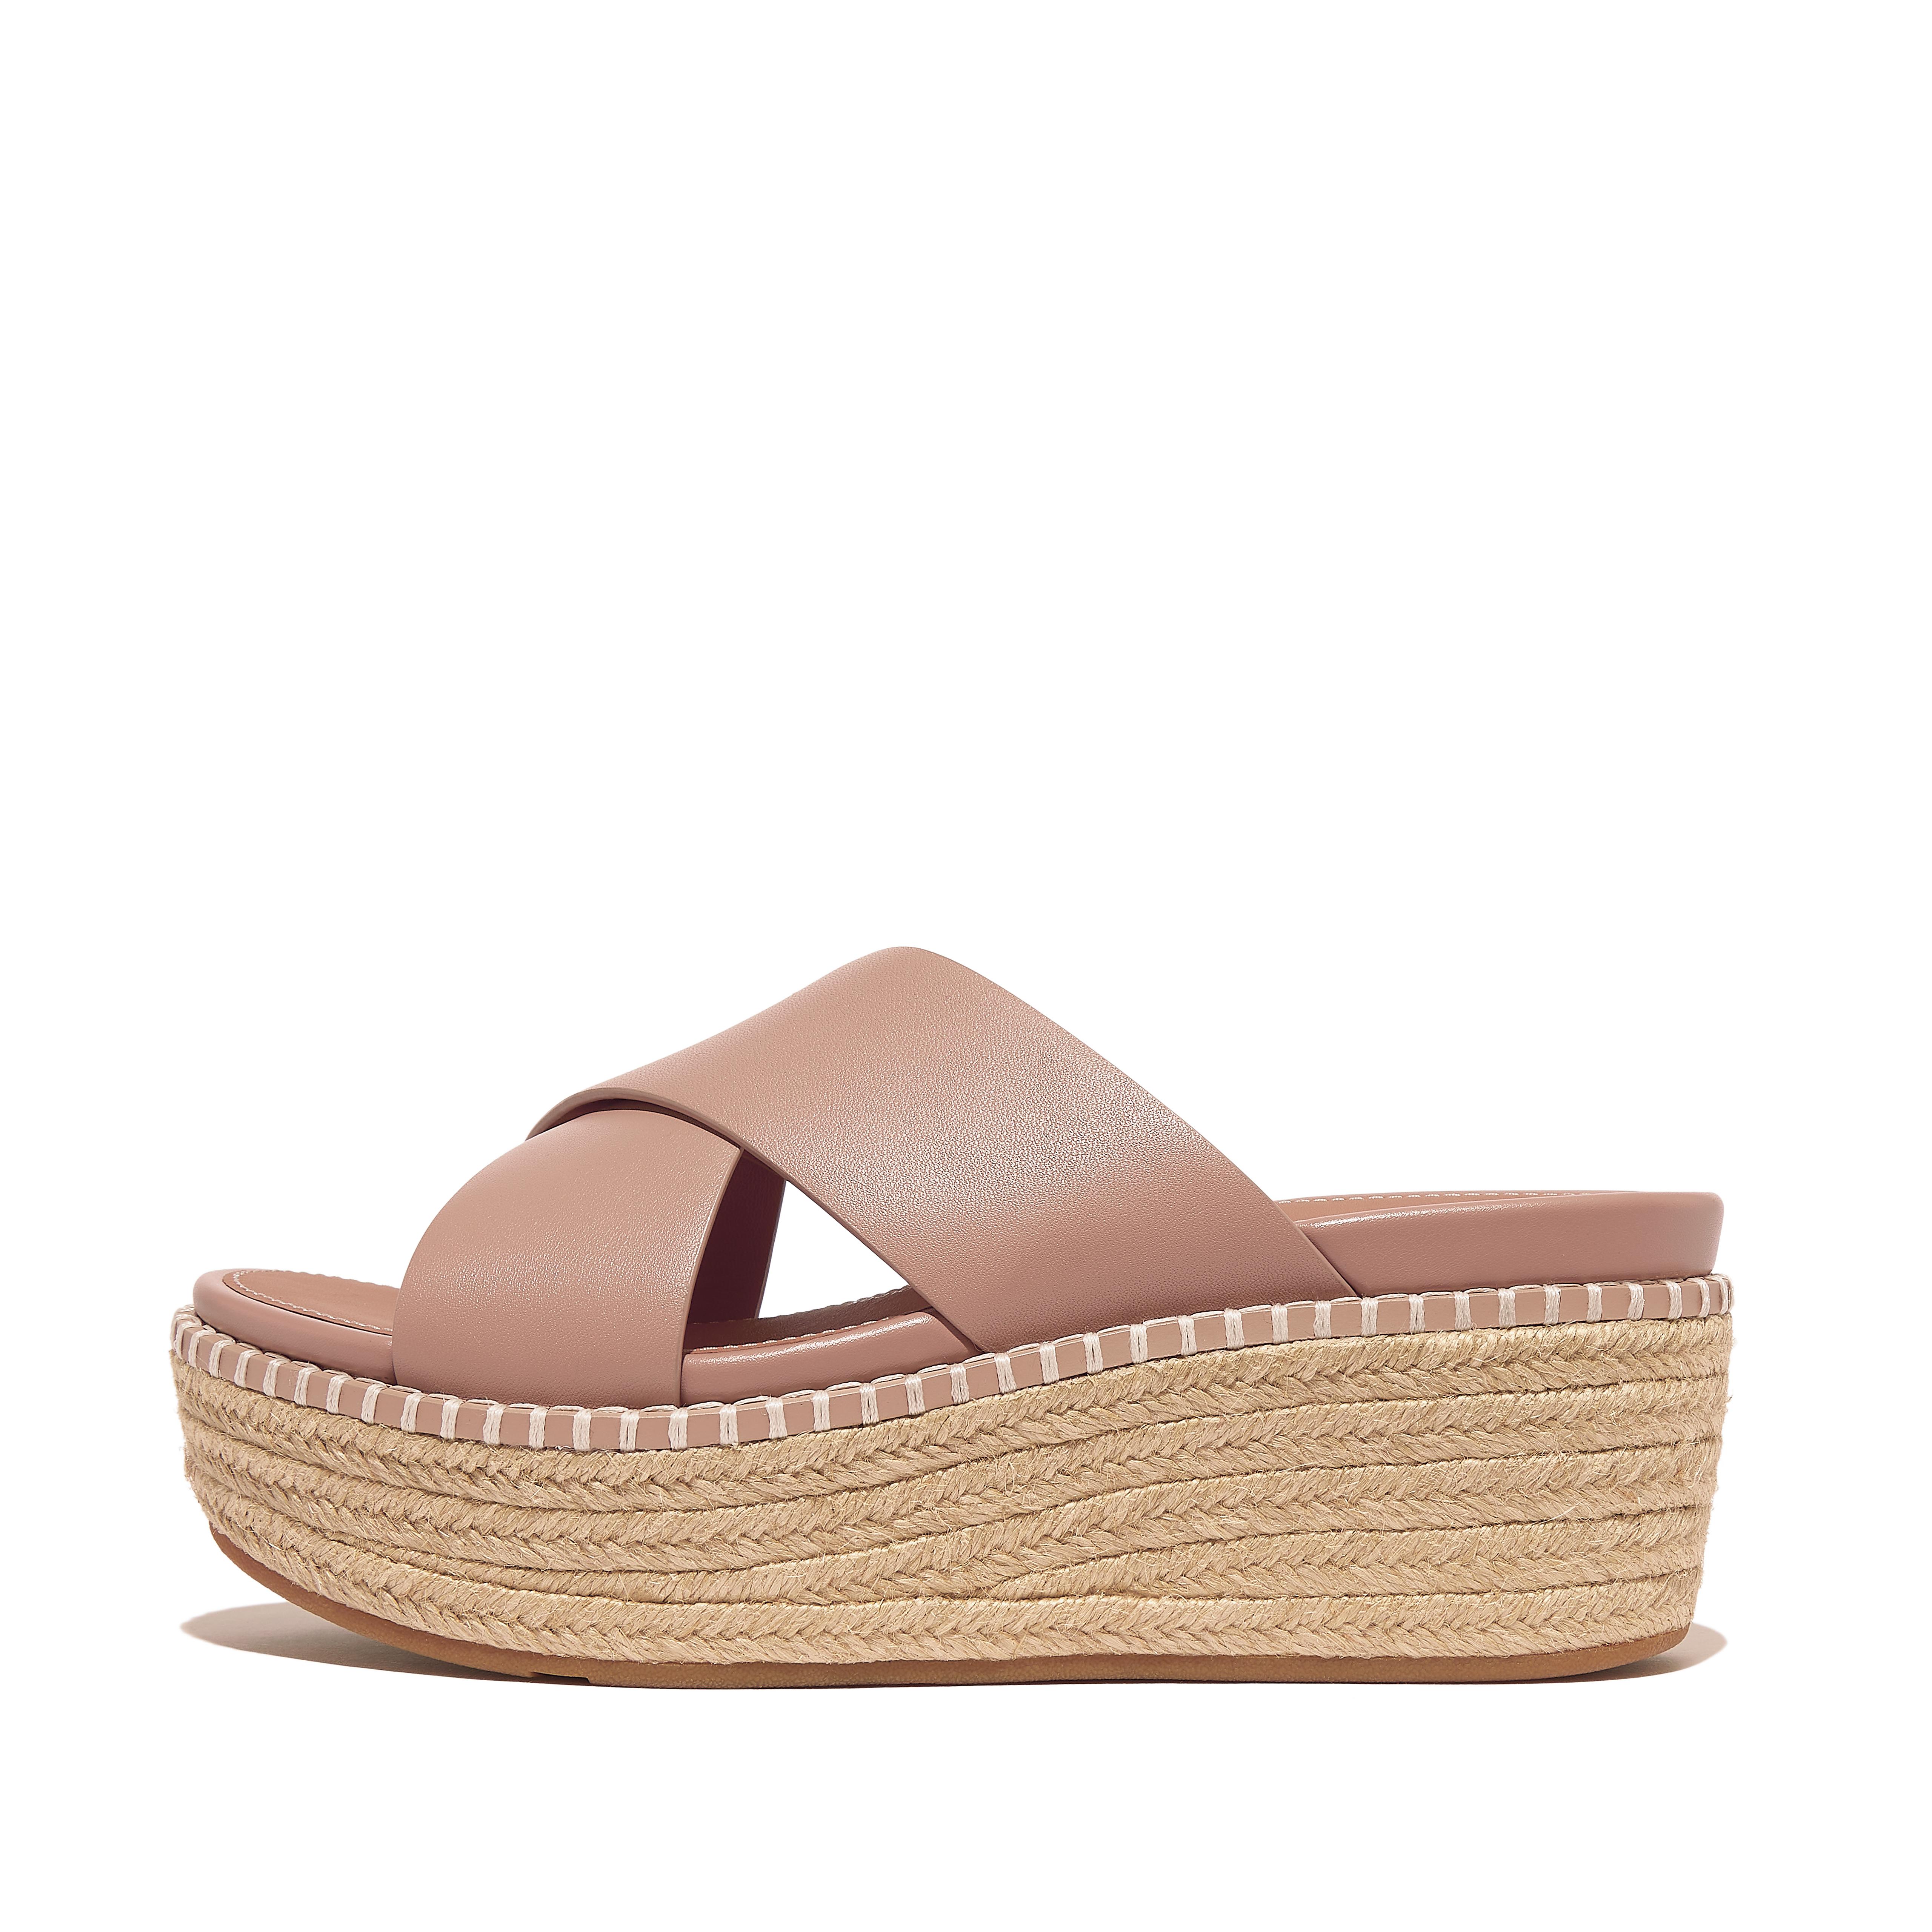 Women's Eloise Leather Slides | FitFlop US